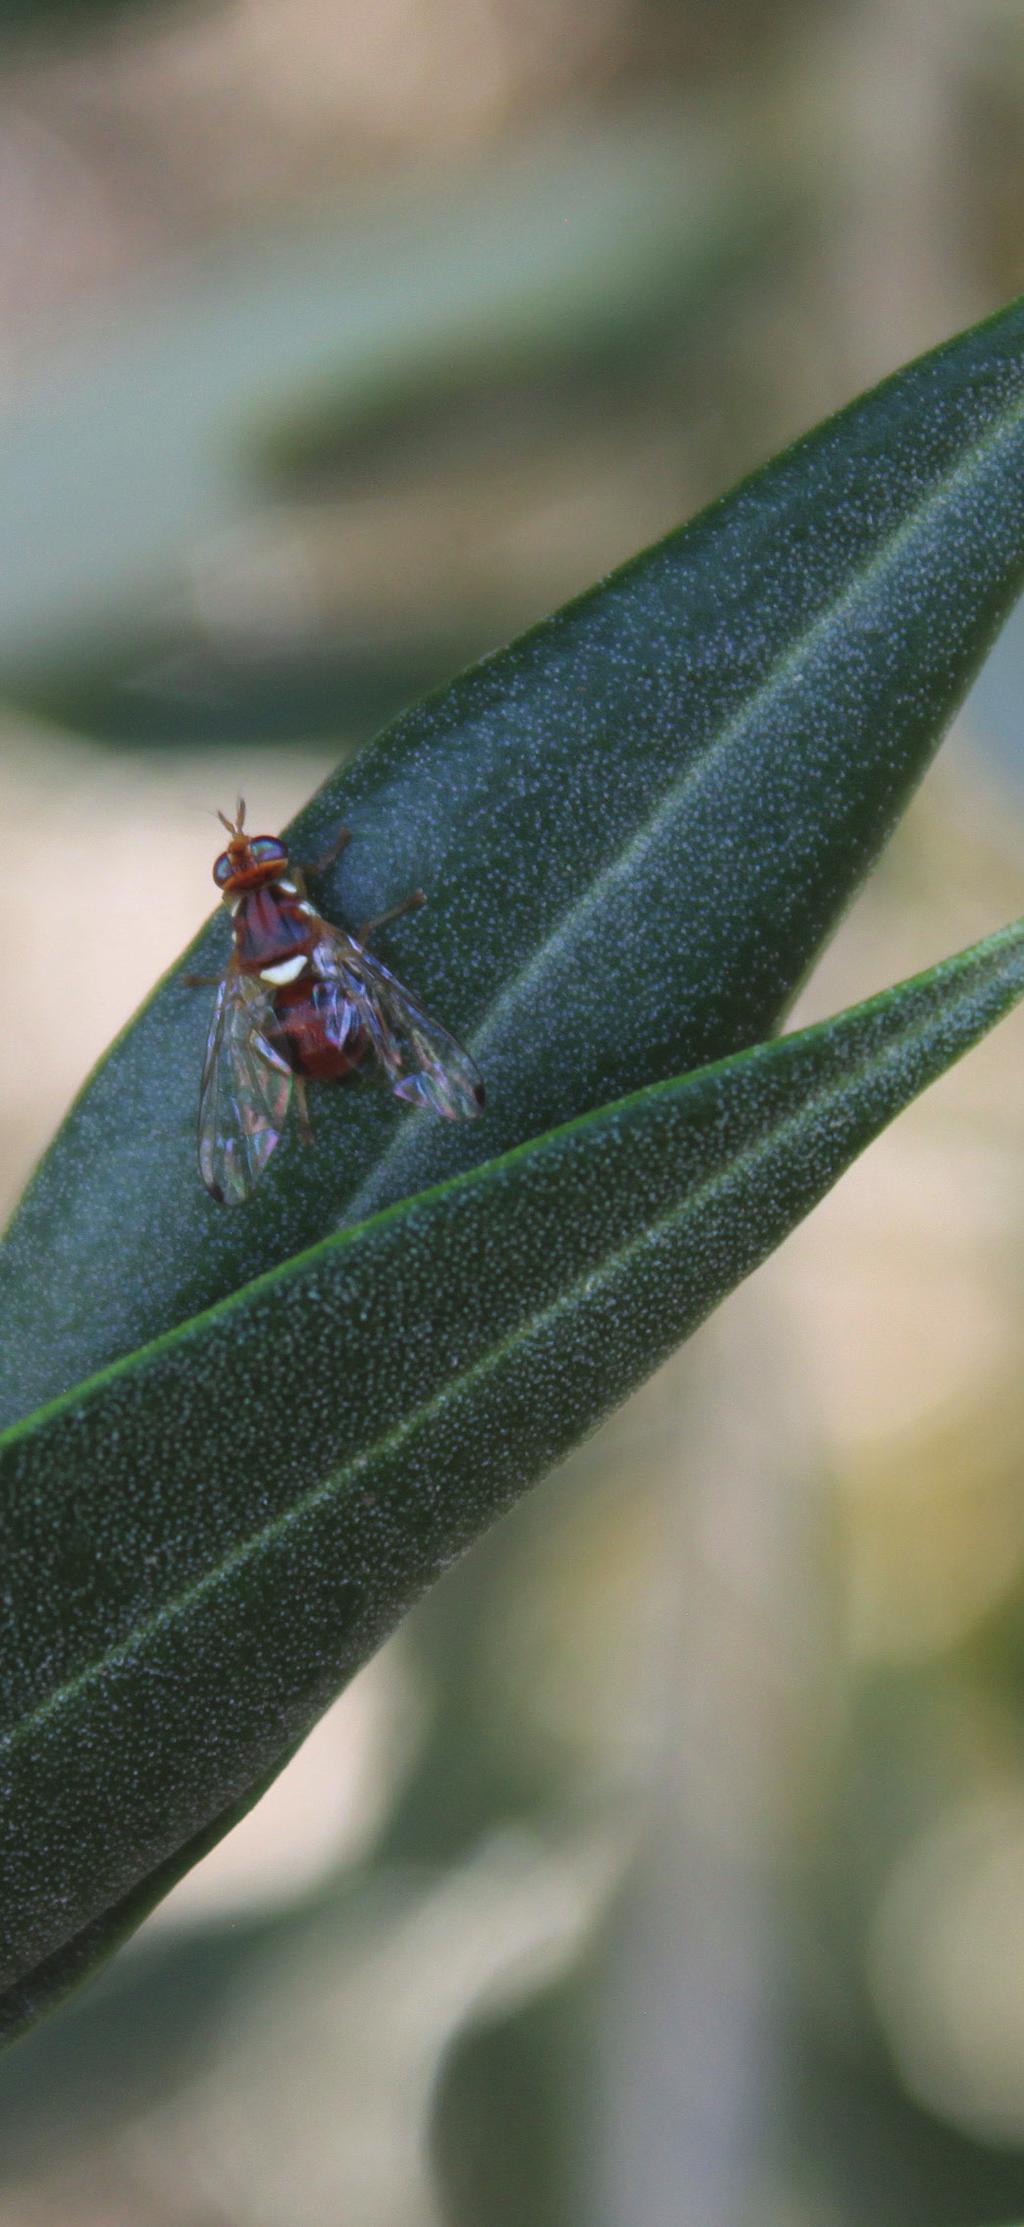 edu Introduction: live fruit fly (OLF) Bactrocera oleae was found for the first time in urban Los Angeles, California in 1998 and rapidly spread to the rest of California by 2002.